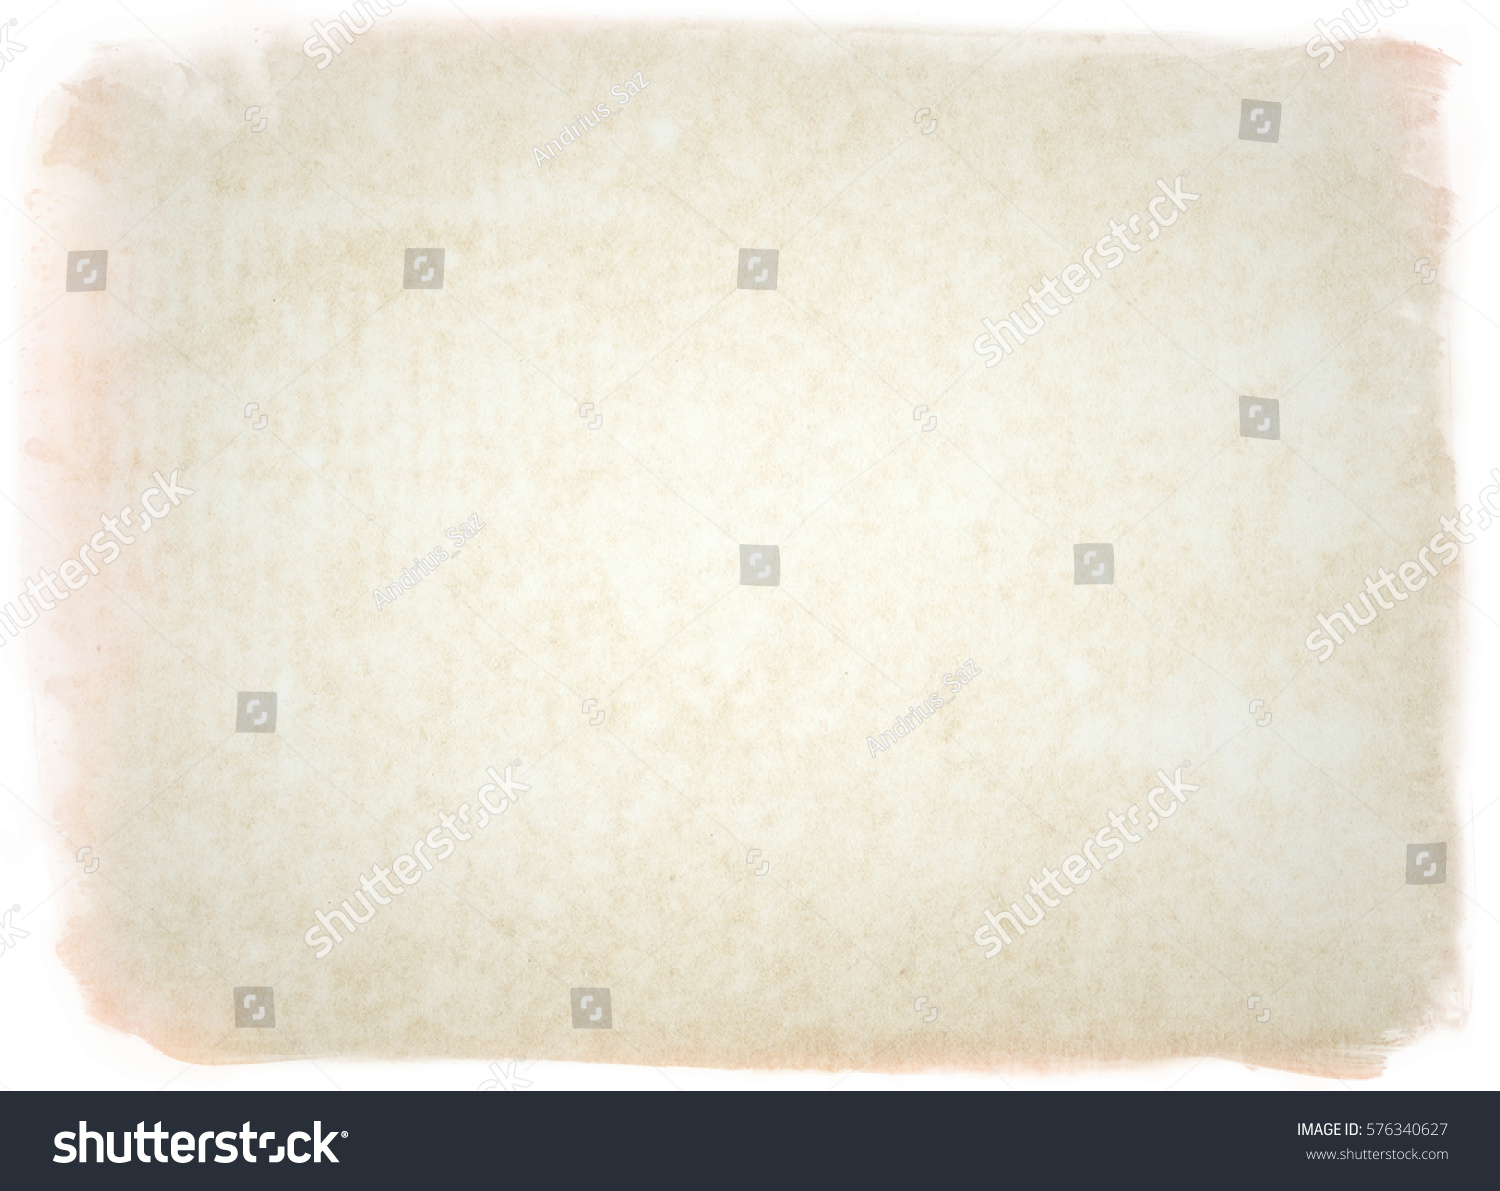 brown empty old vintage paper background. Paper texture #576340627